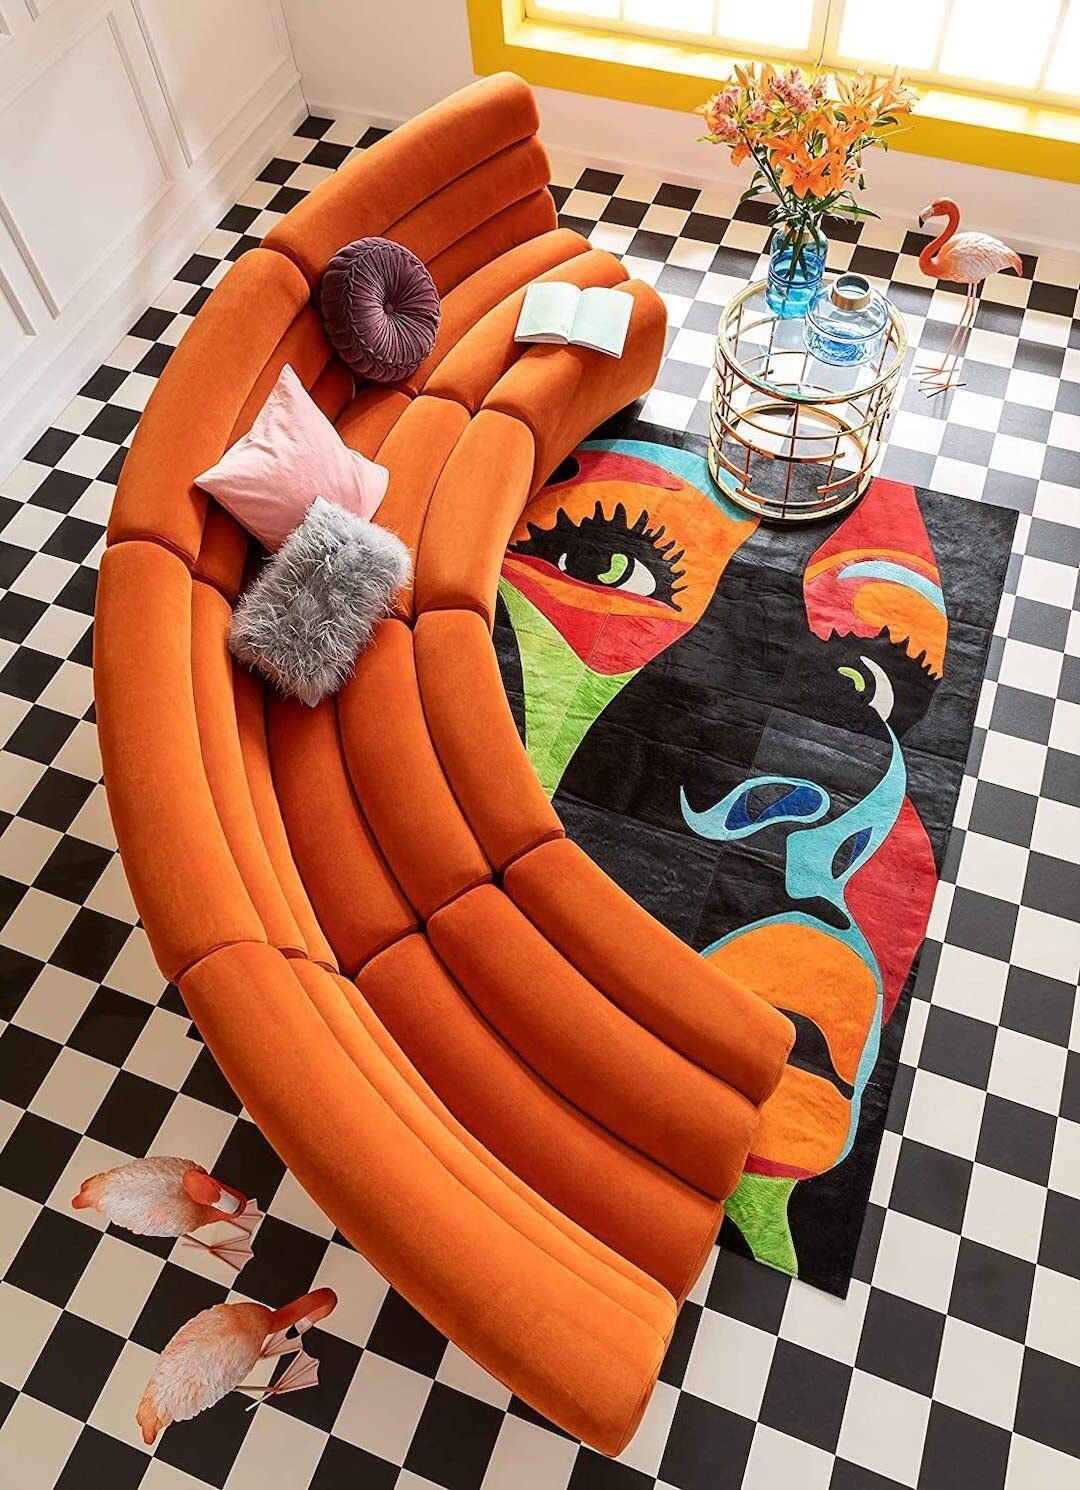 Timeless Charm: Why Retro Sofas are Making a Comeback in Interior Design